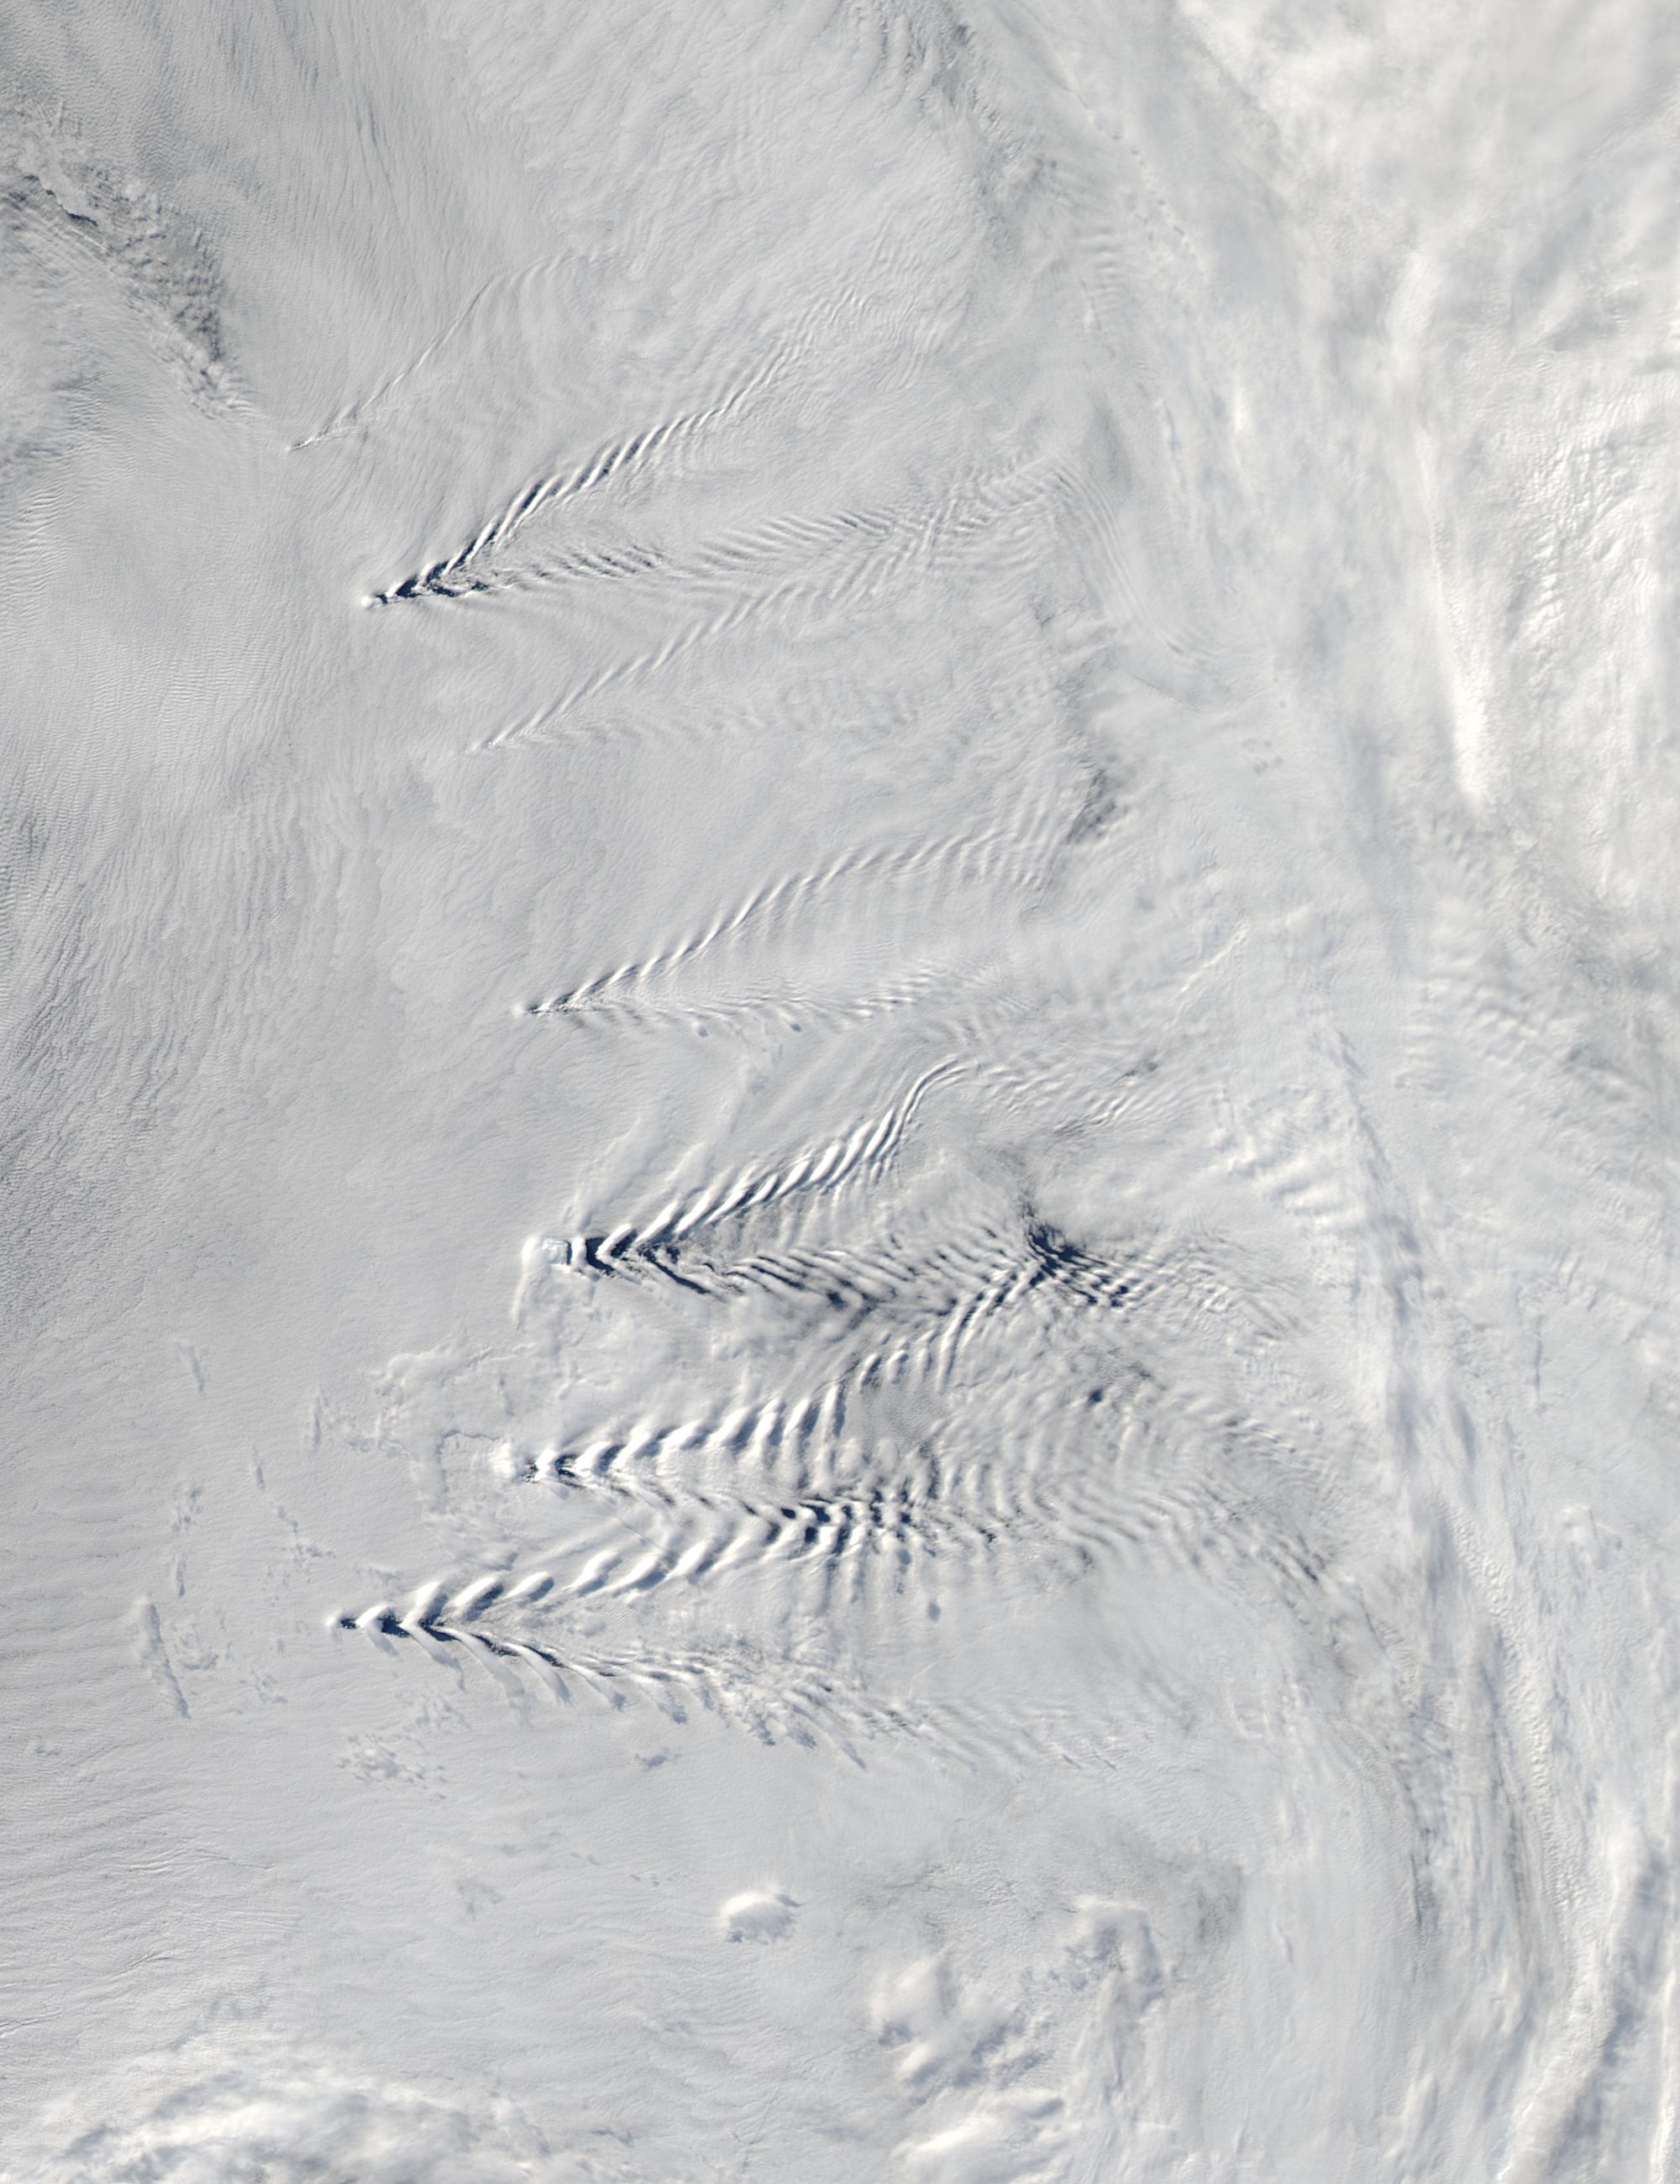 Ship-wave-shape wave clouds induced by South Sandwich Islands - related image preview